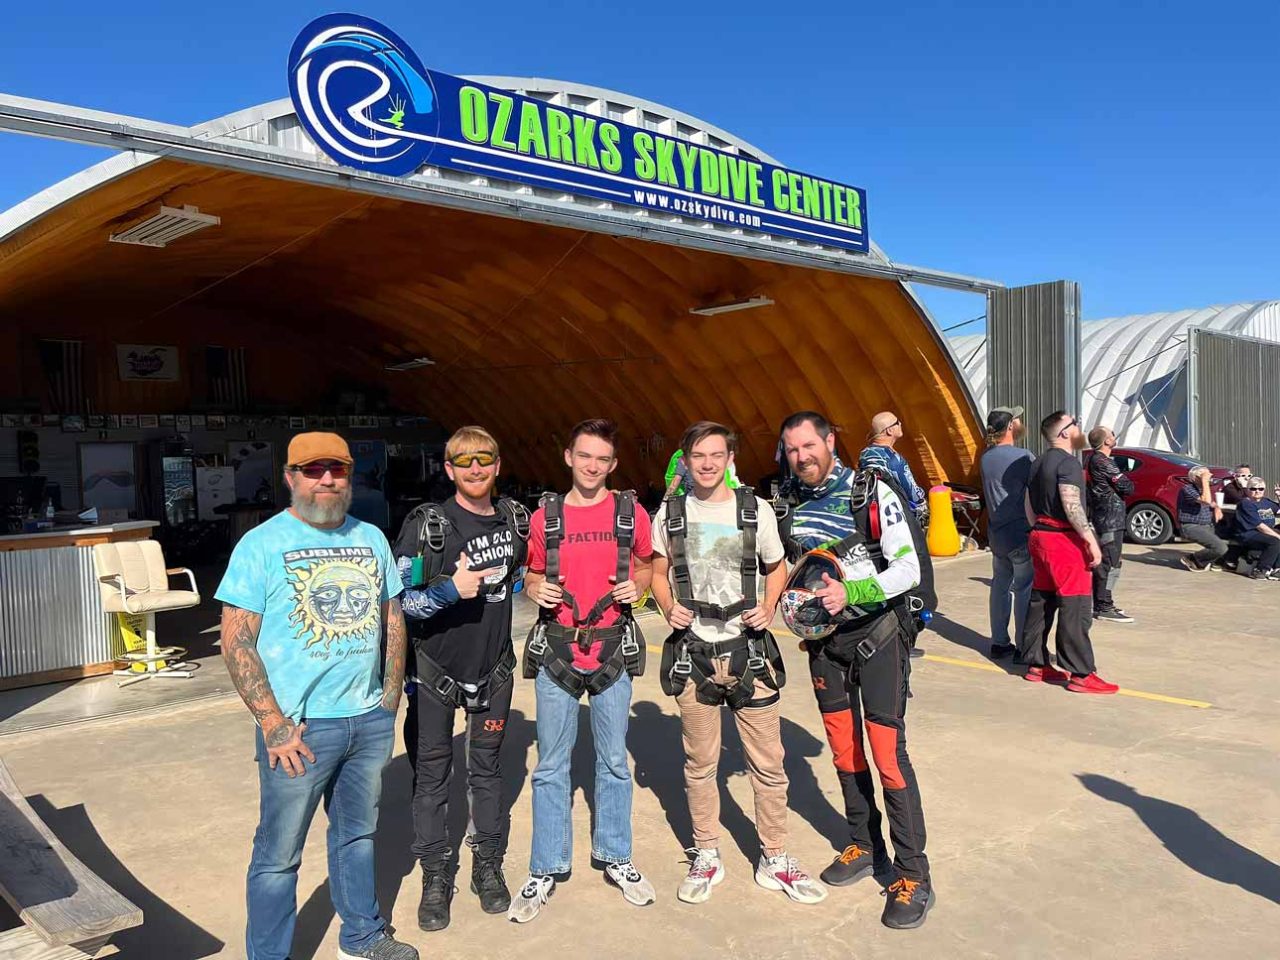 group of young men pose in front of OZARKS Skydive Center sign before skydiving